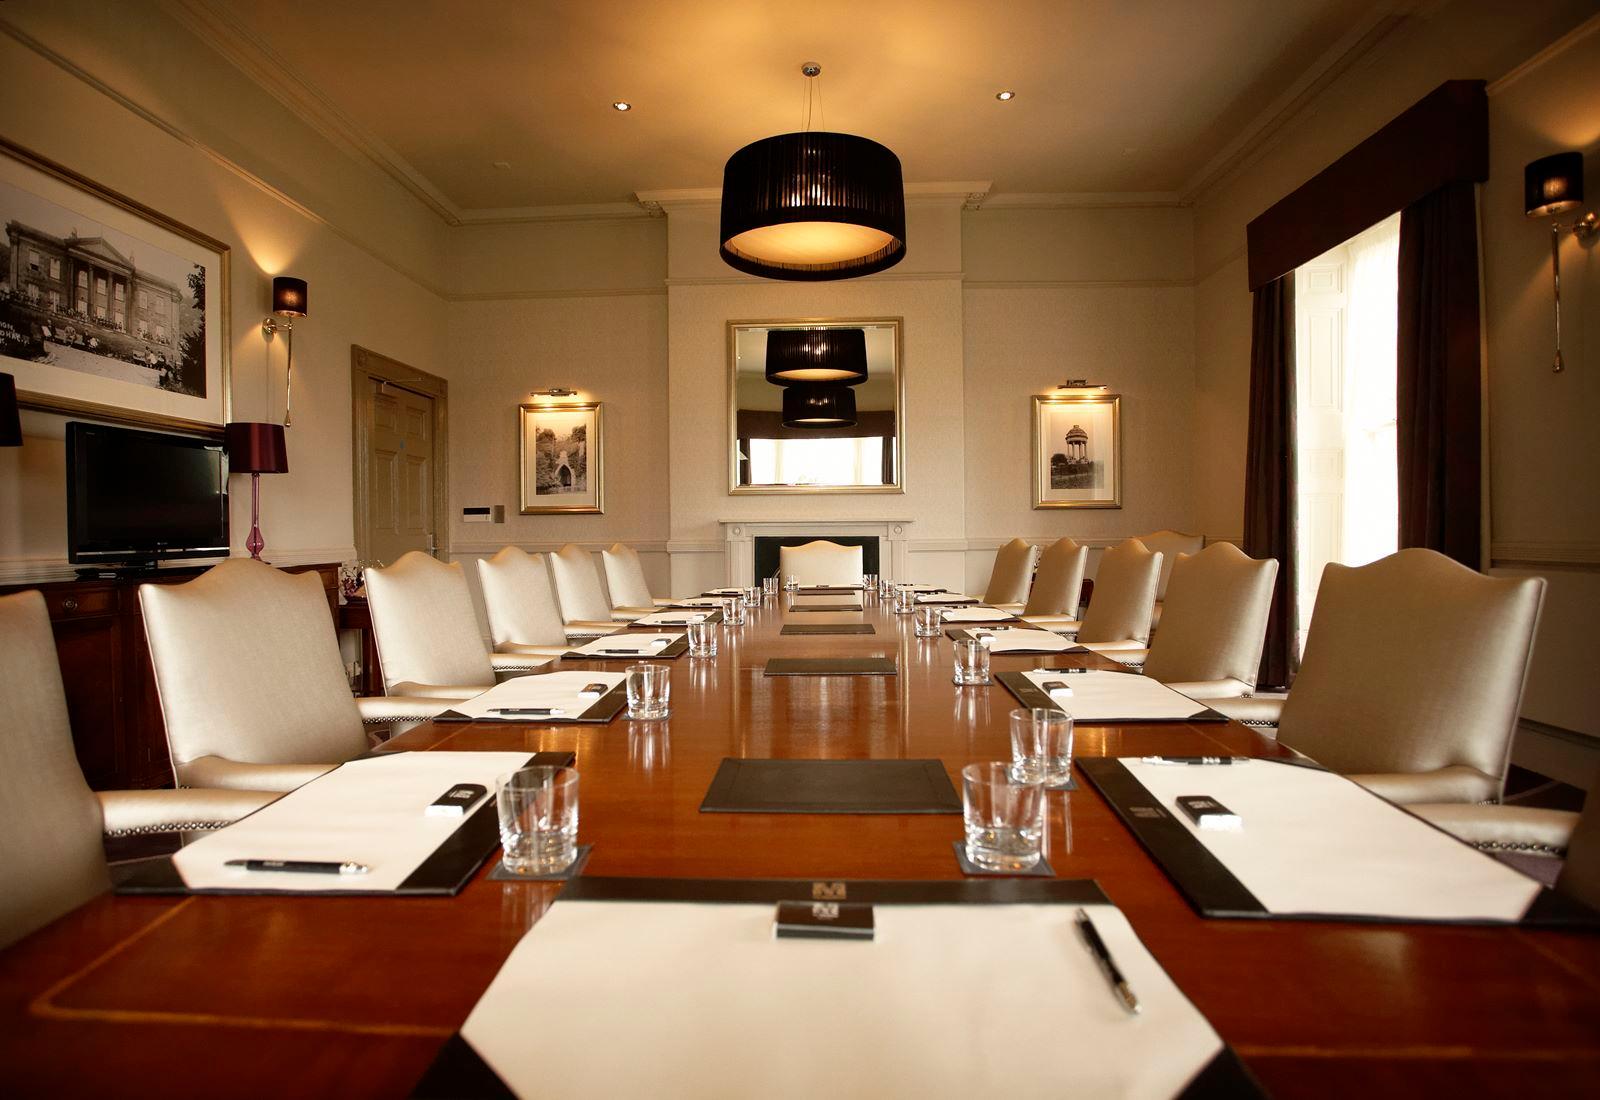 Meeting Rooms, The Mansion photo #1